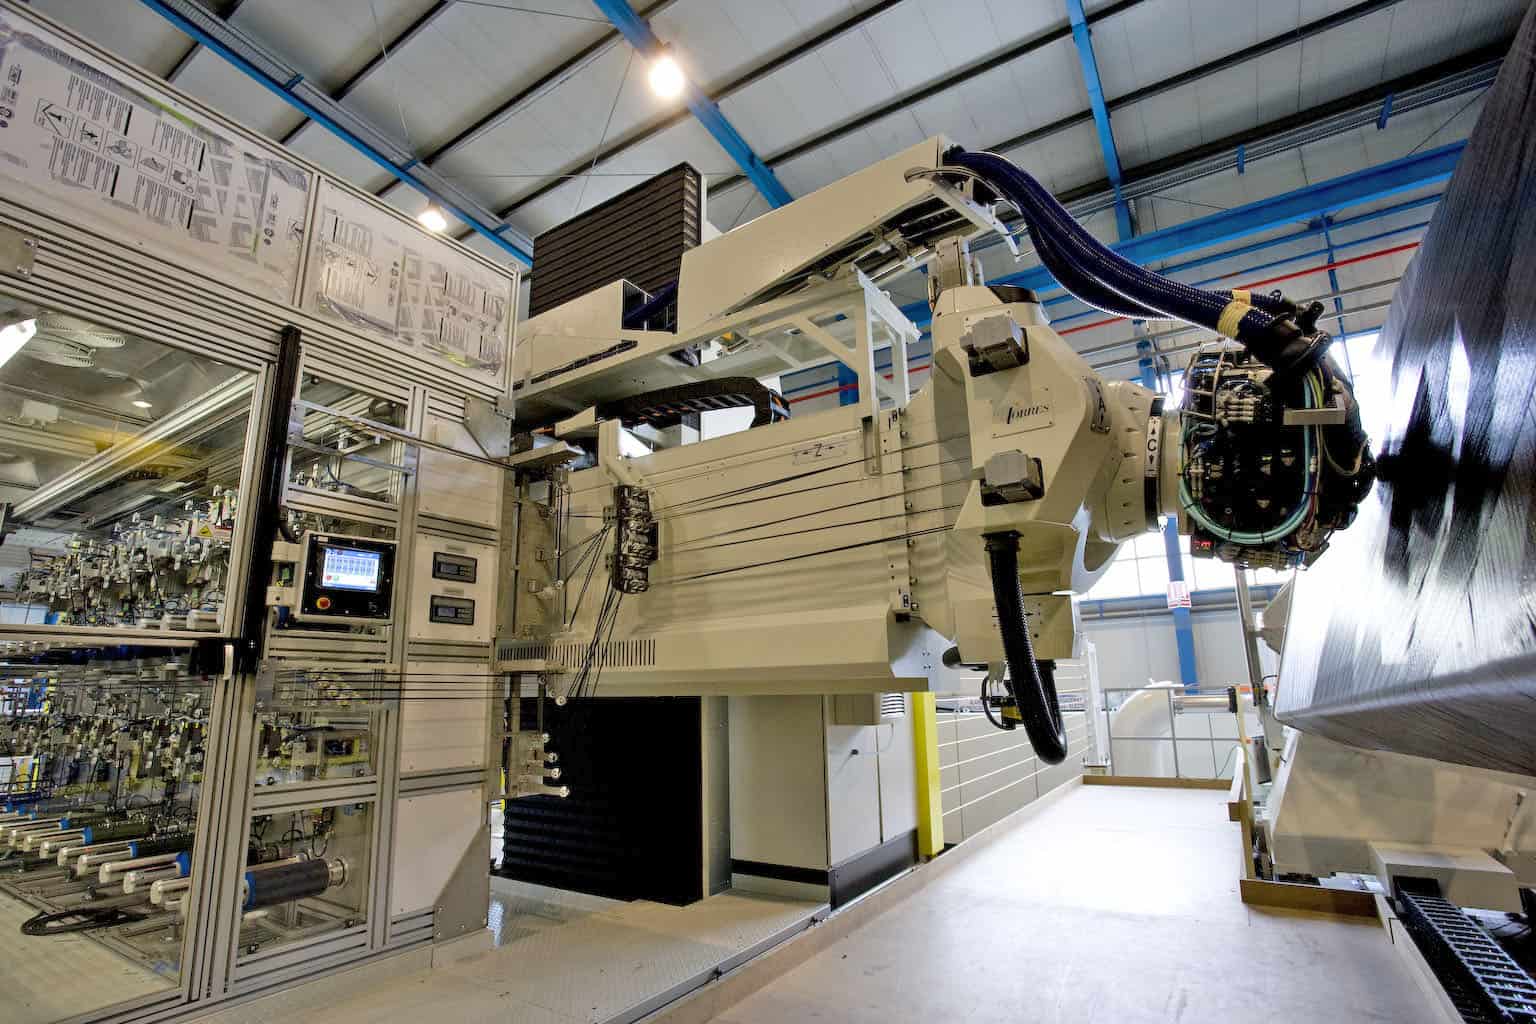 The fibre placement machine at GKN's Severnside factory